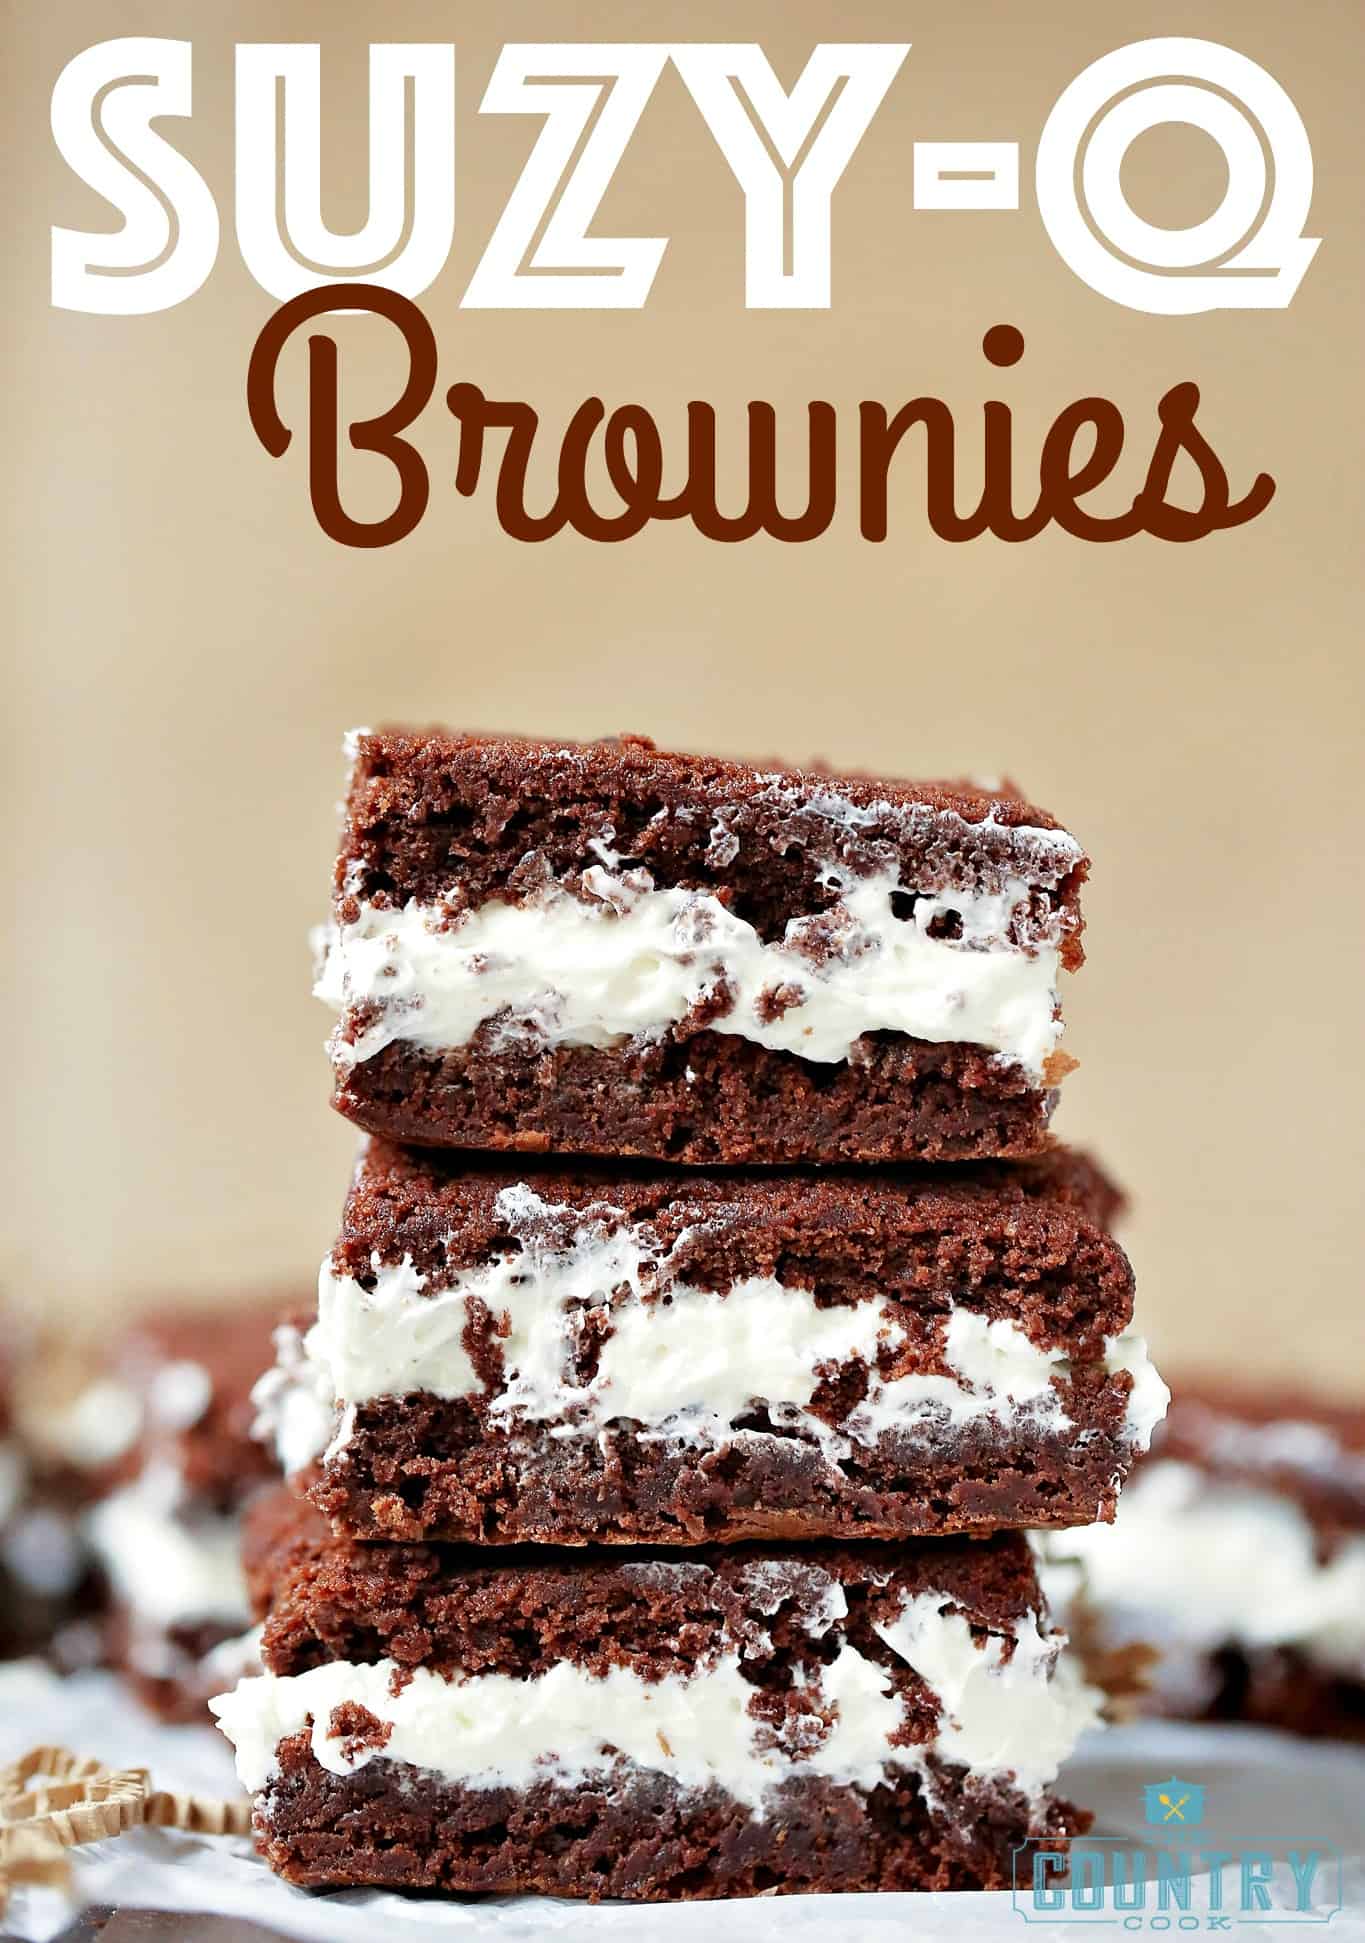 three slices of Suzy-Q Brownies shown stacked on top of each other. 